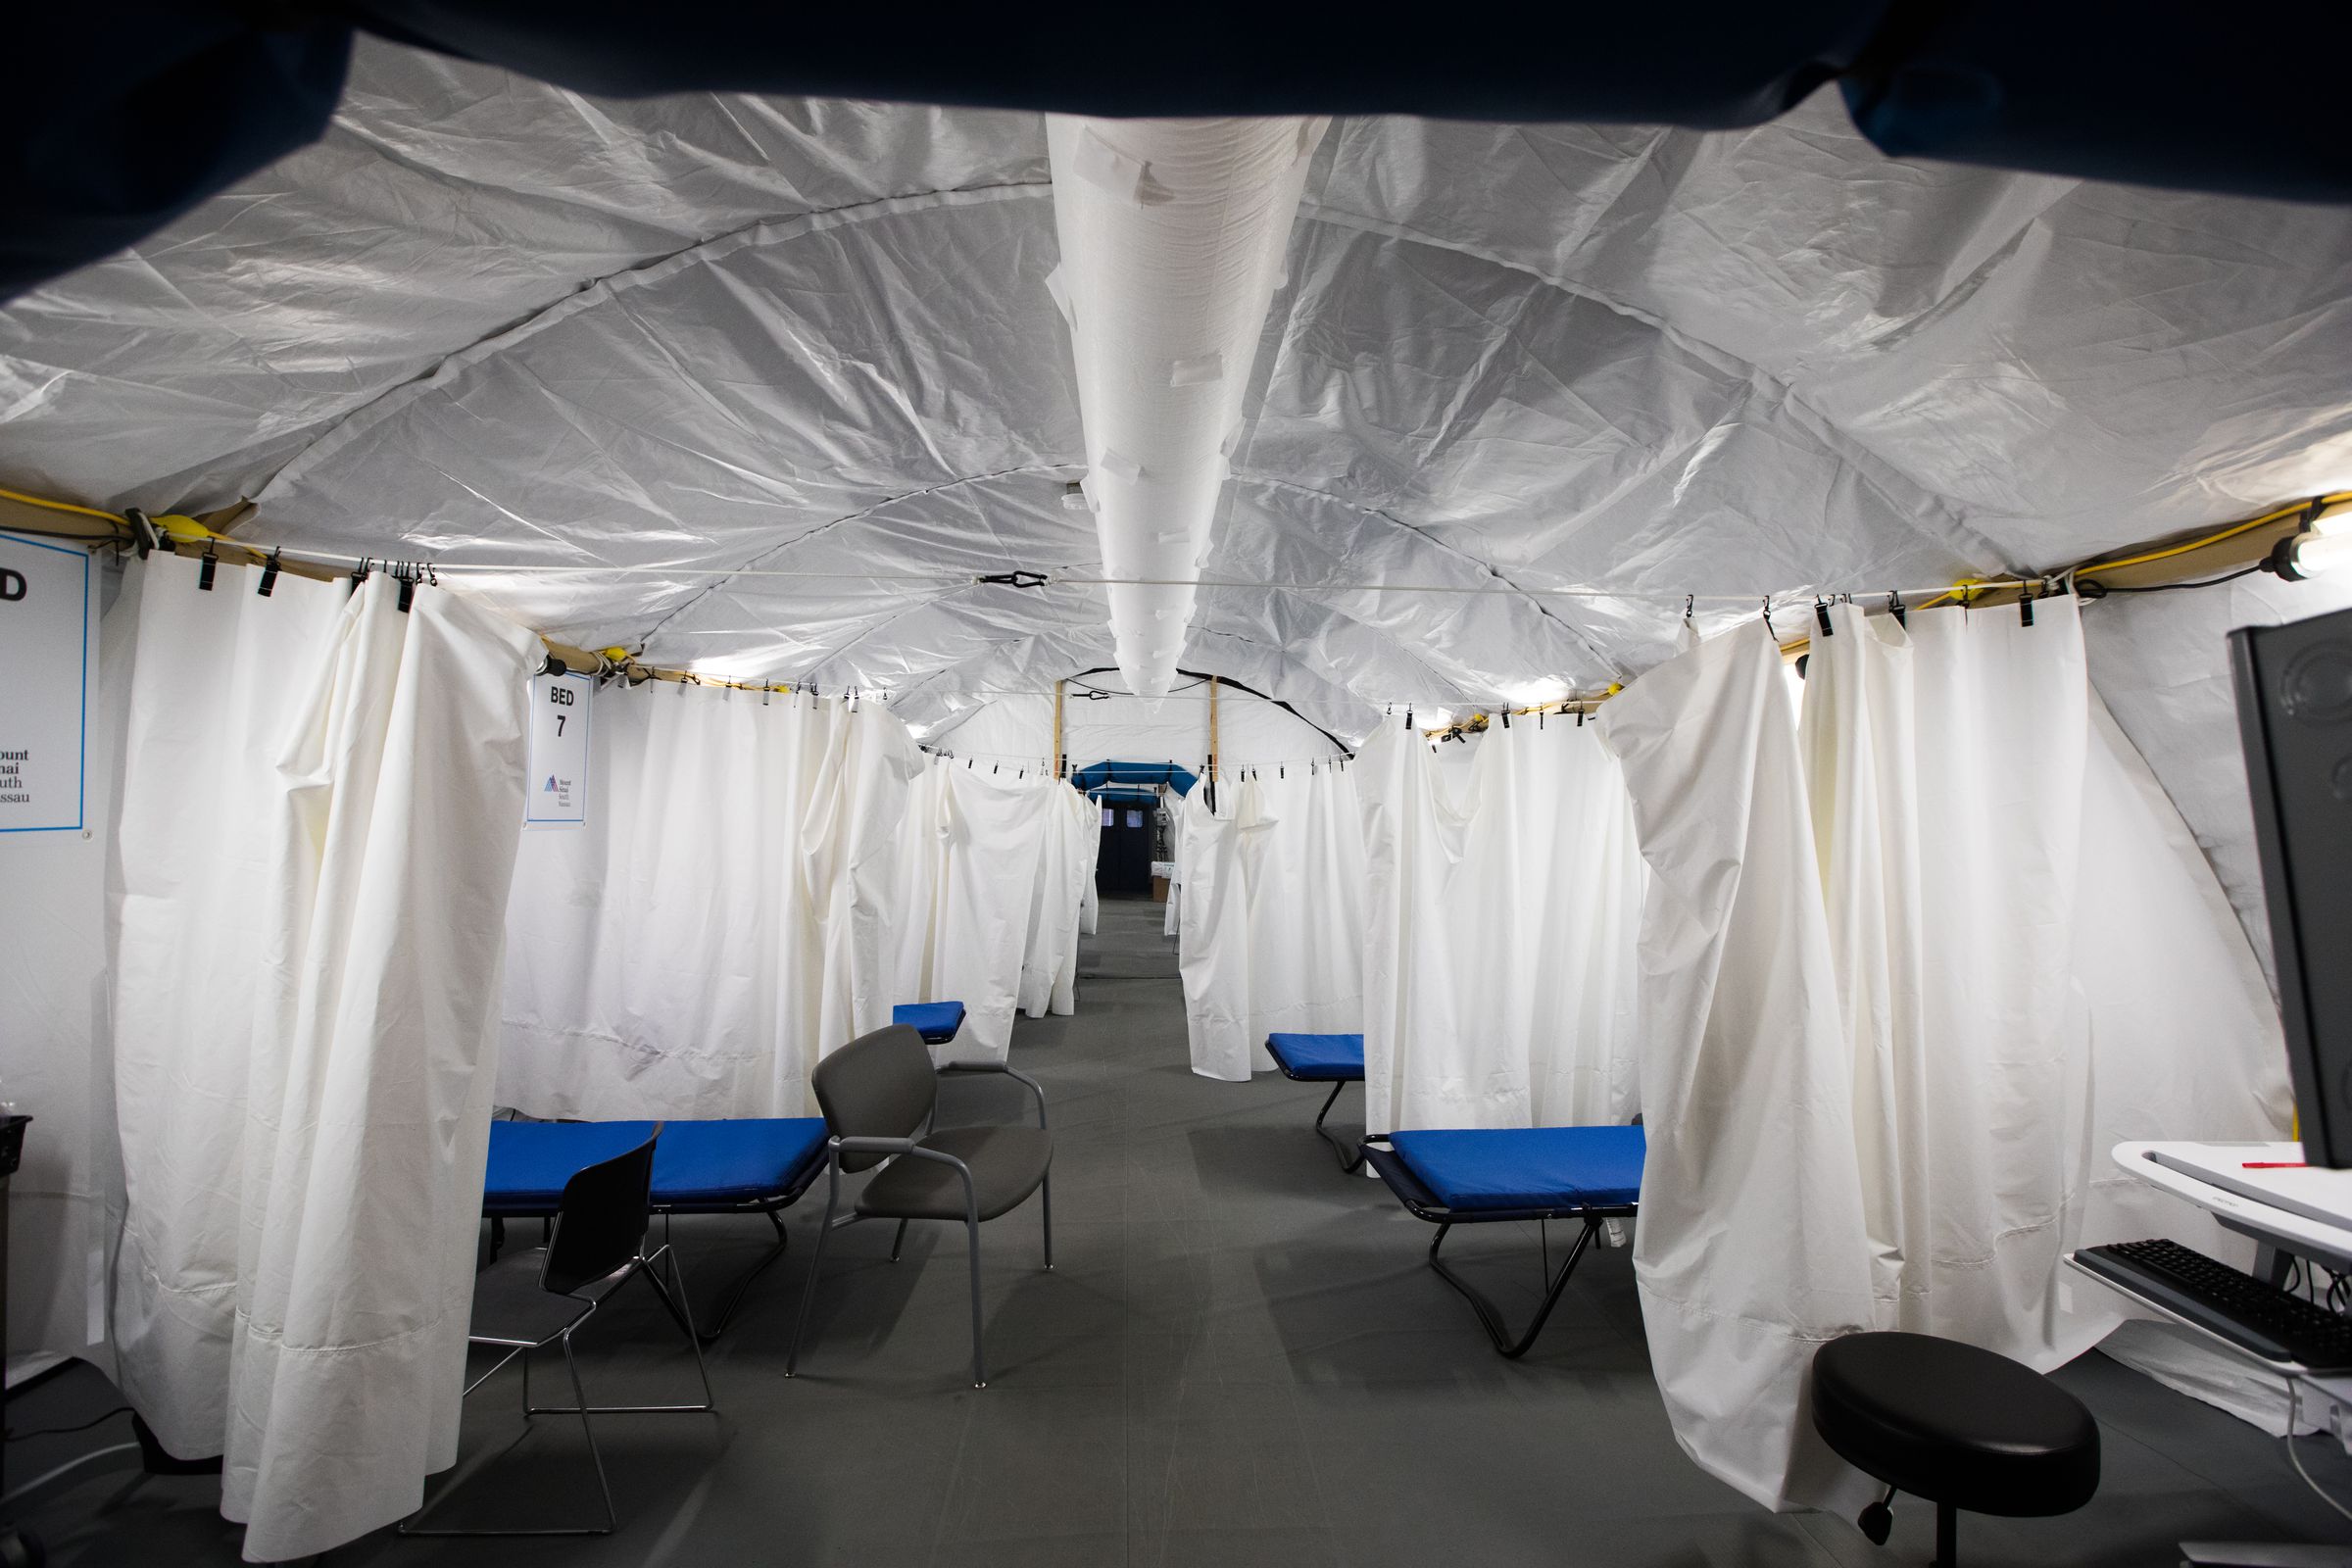 Triage tent set up in Long Island hospital during pandemic